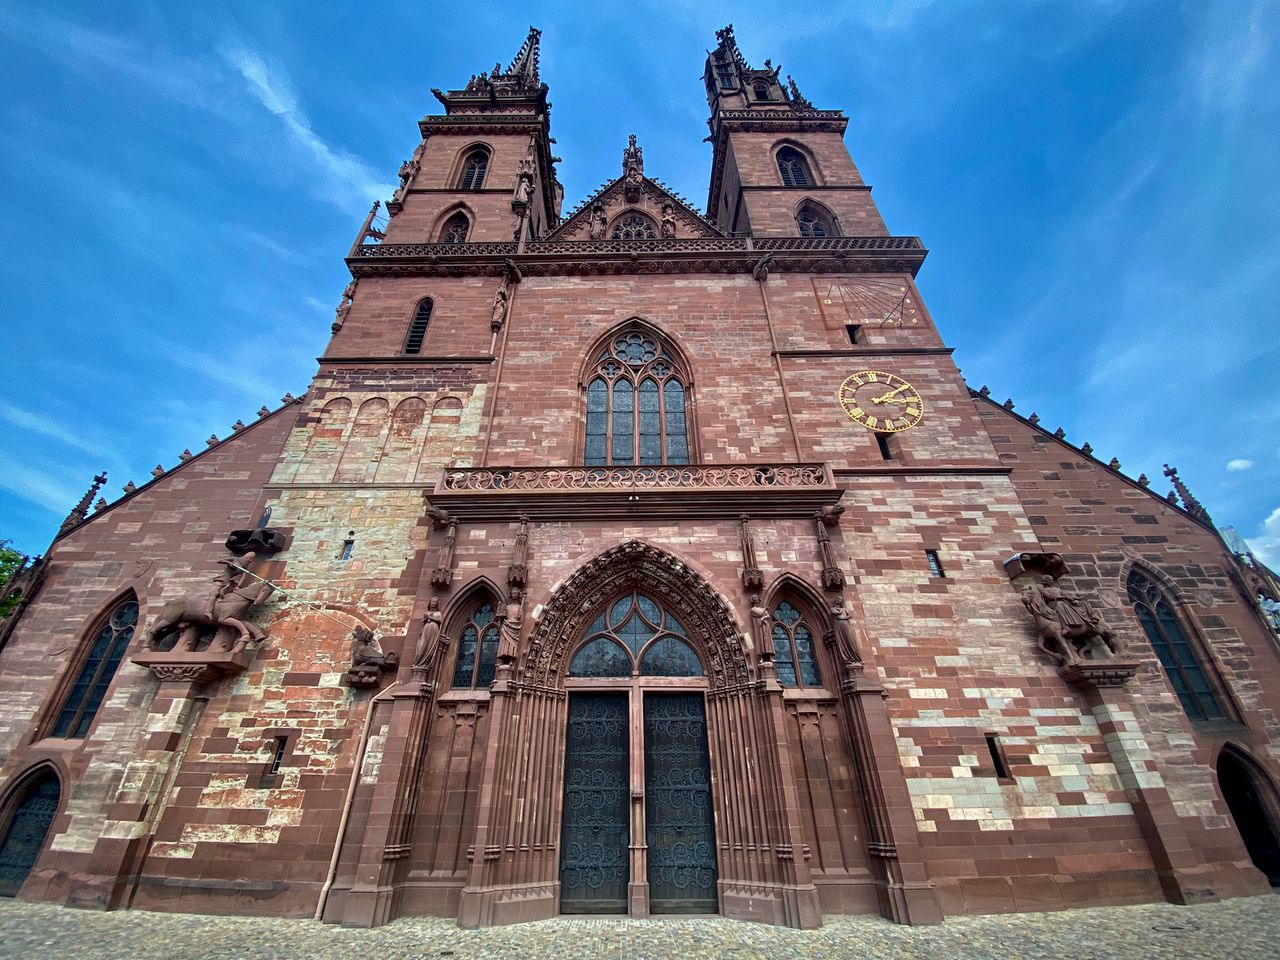 A wide-angle show of the front of the Basler Münster.